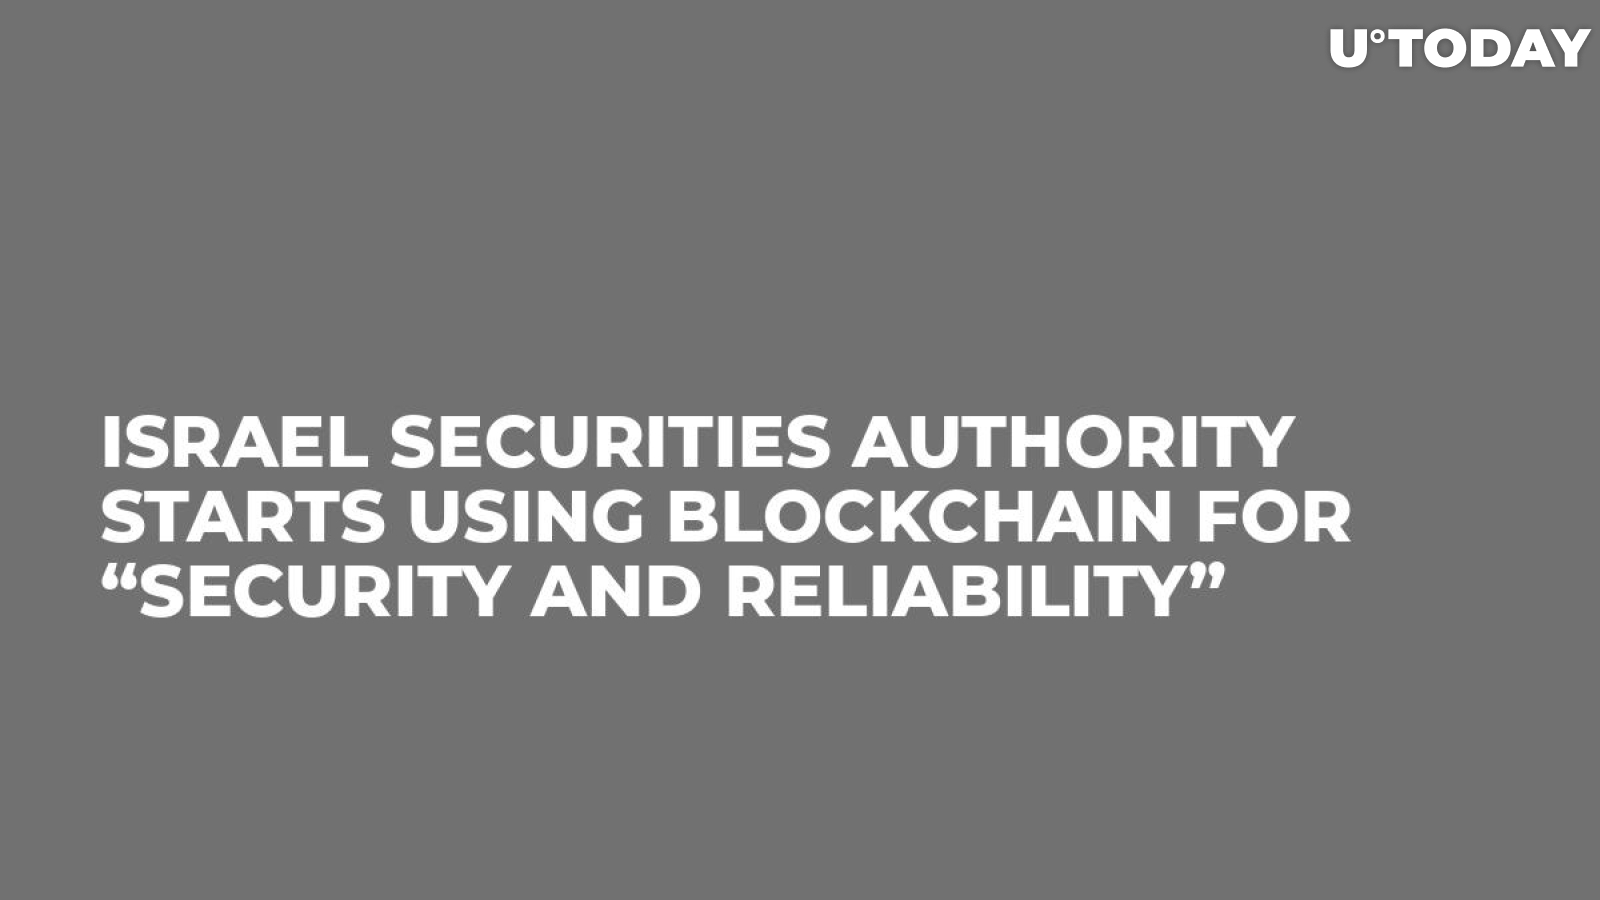 Israel Securities Authority Starts Using Blockchain For “Security And Reliability”